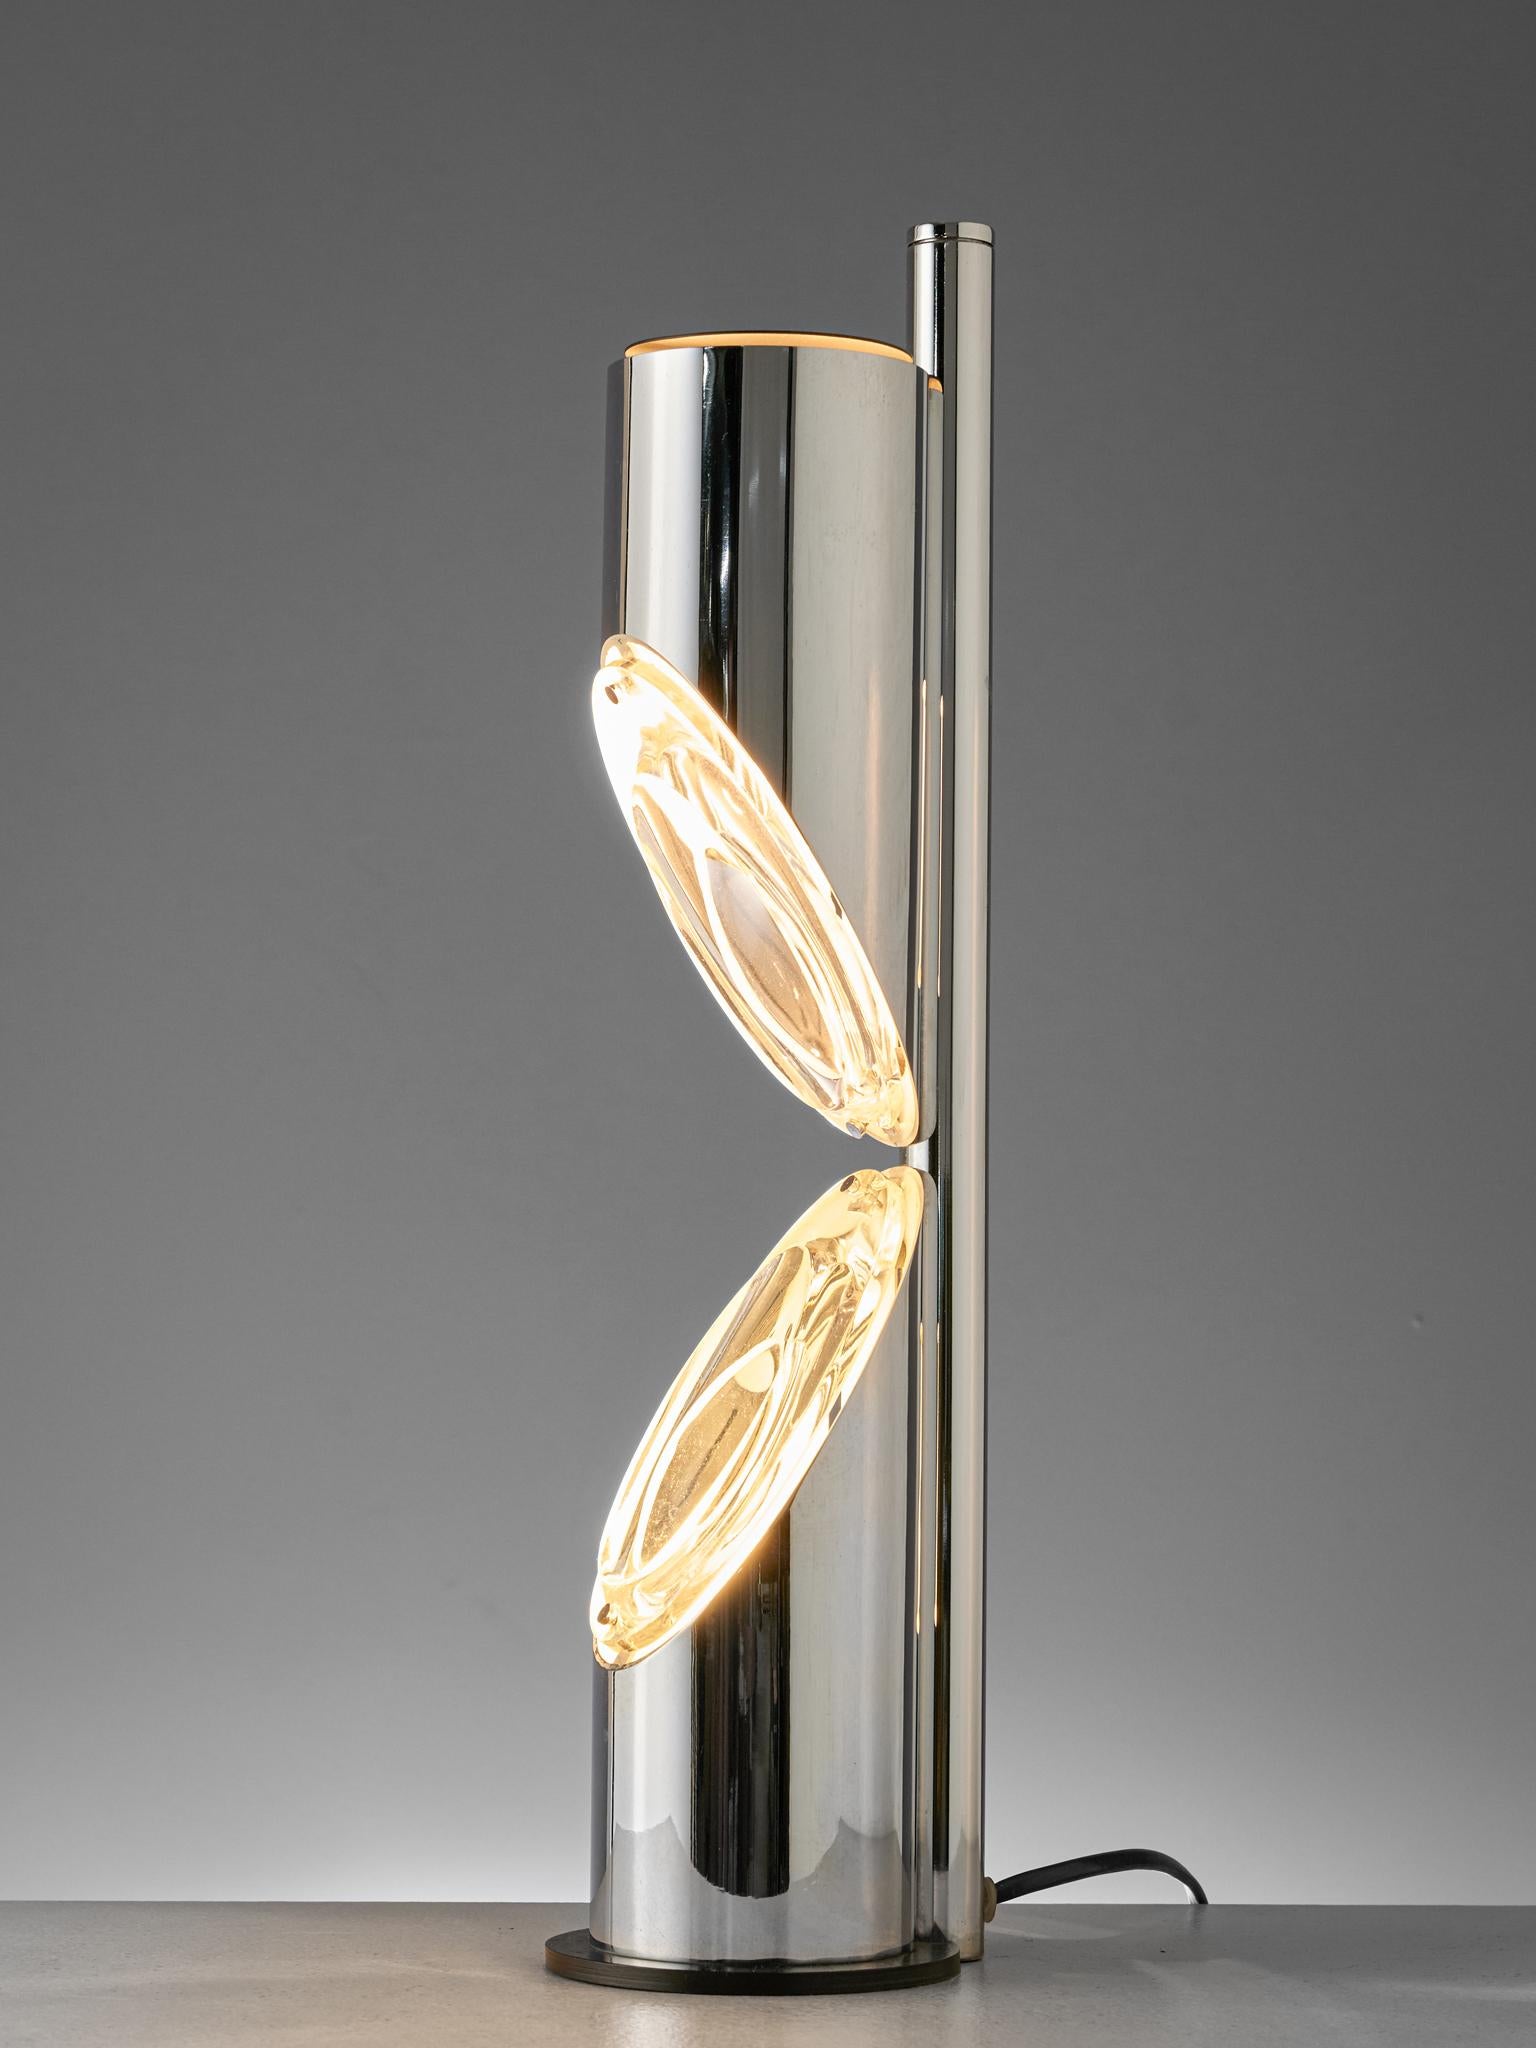 Table lamp, chromed metal, glass, Italy, 1970s

Large chromed metal table lamp manufactured by Luci Illumiazione Cinisello Milano. A futuristic space age design with two metal tubes with each one diagonal side that hold a light source. The light